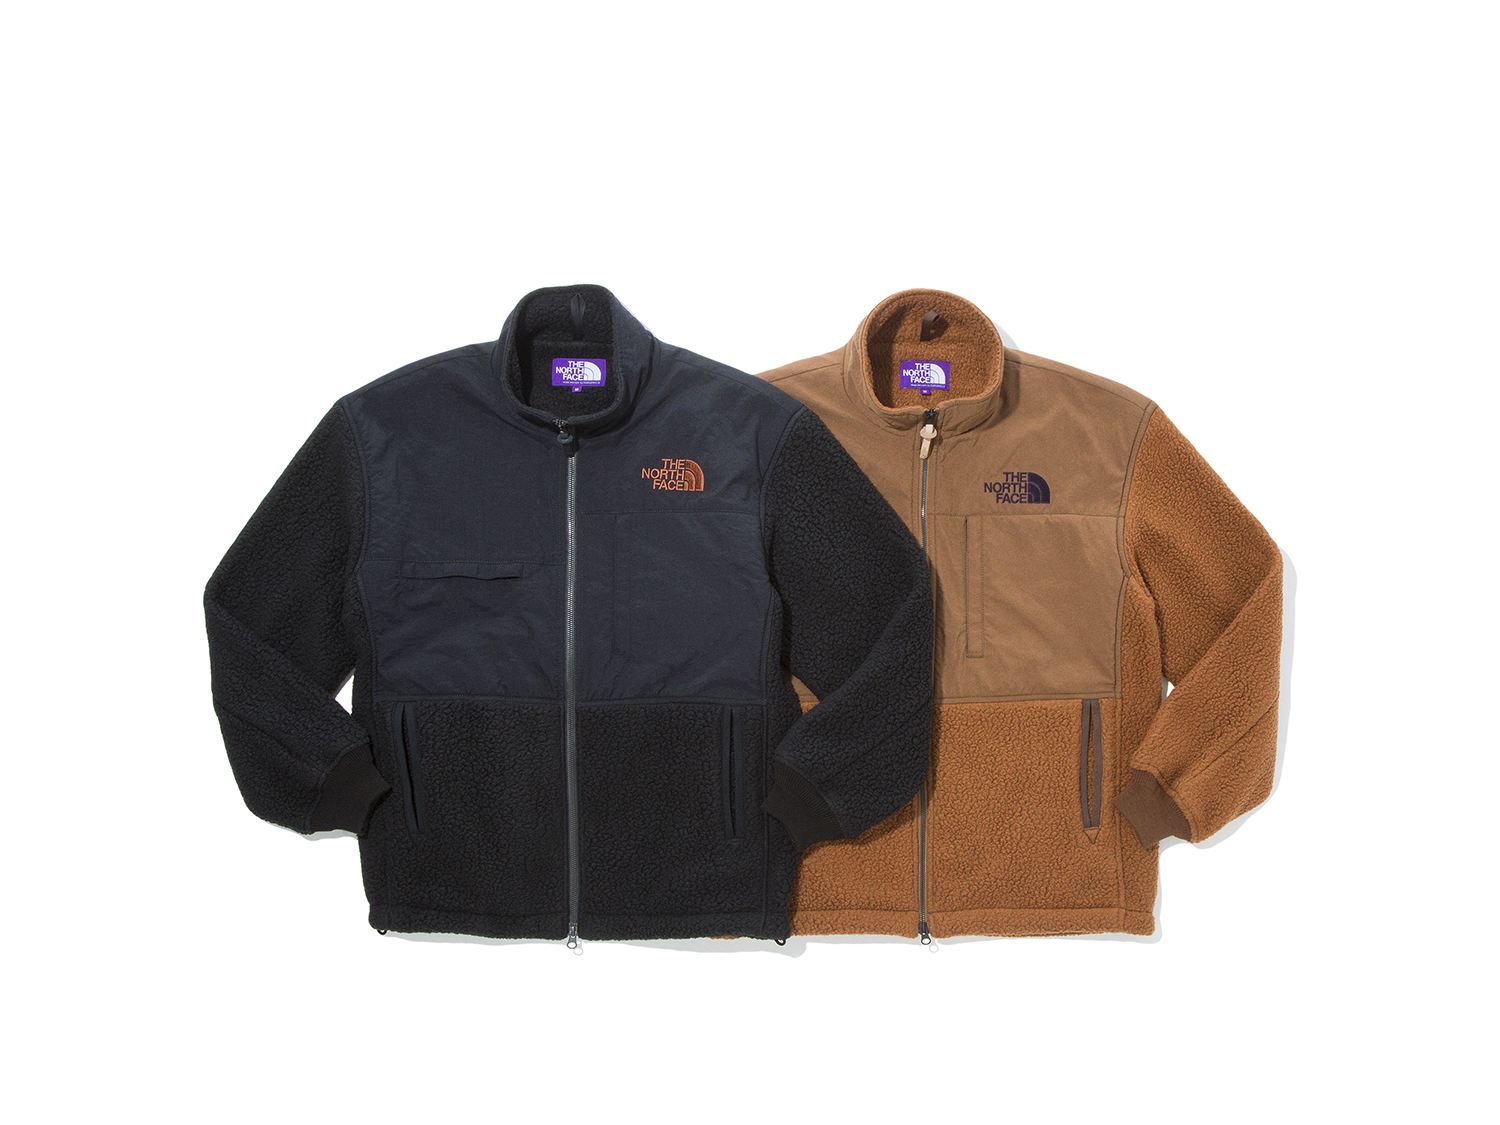 THE NORTH FACE PURPLE LABEL × BEAUTY&YOUTHのフリース